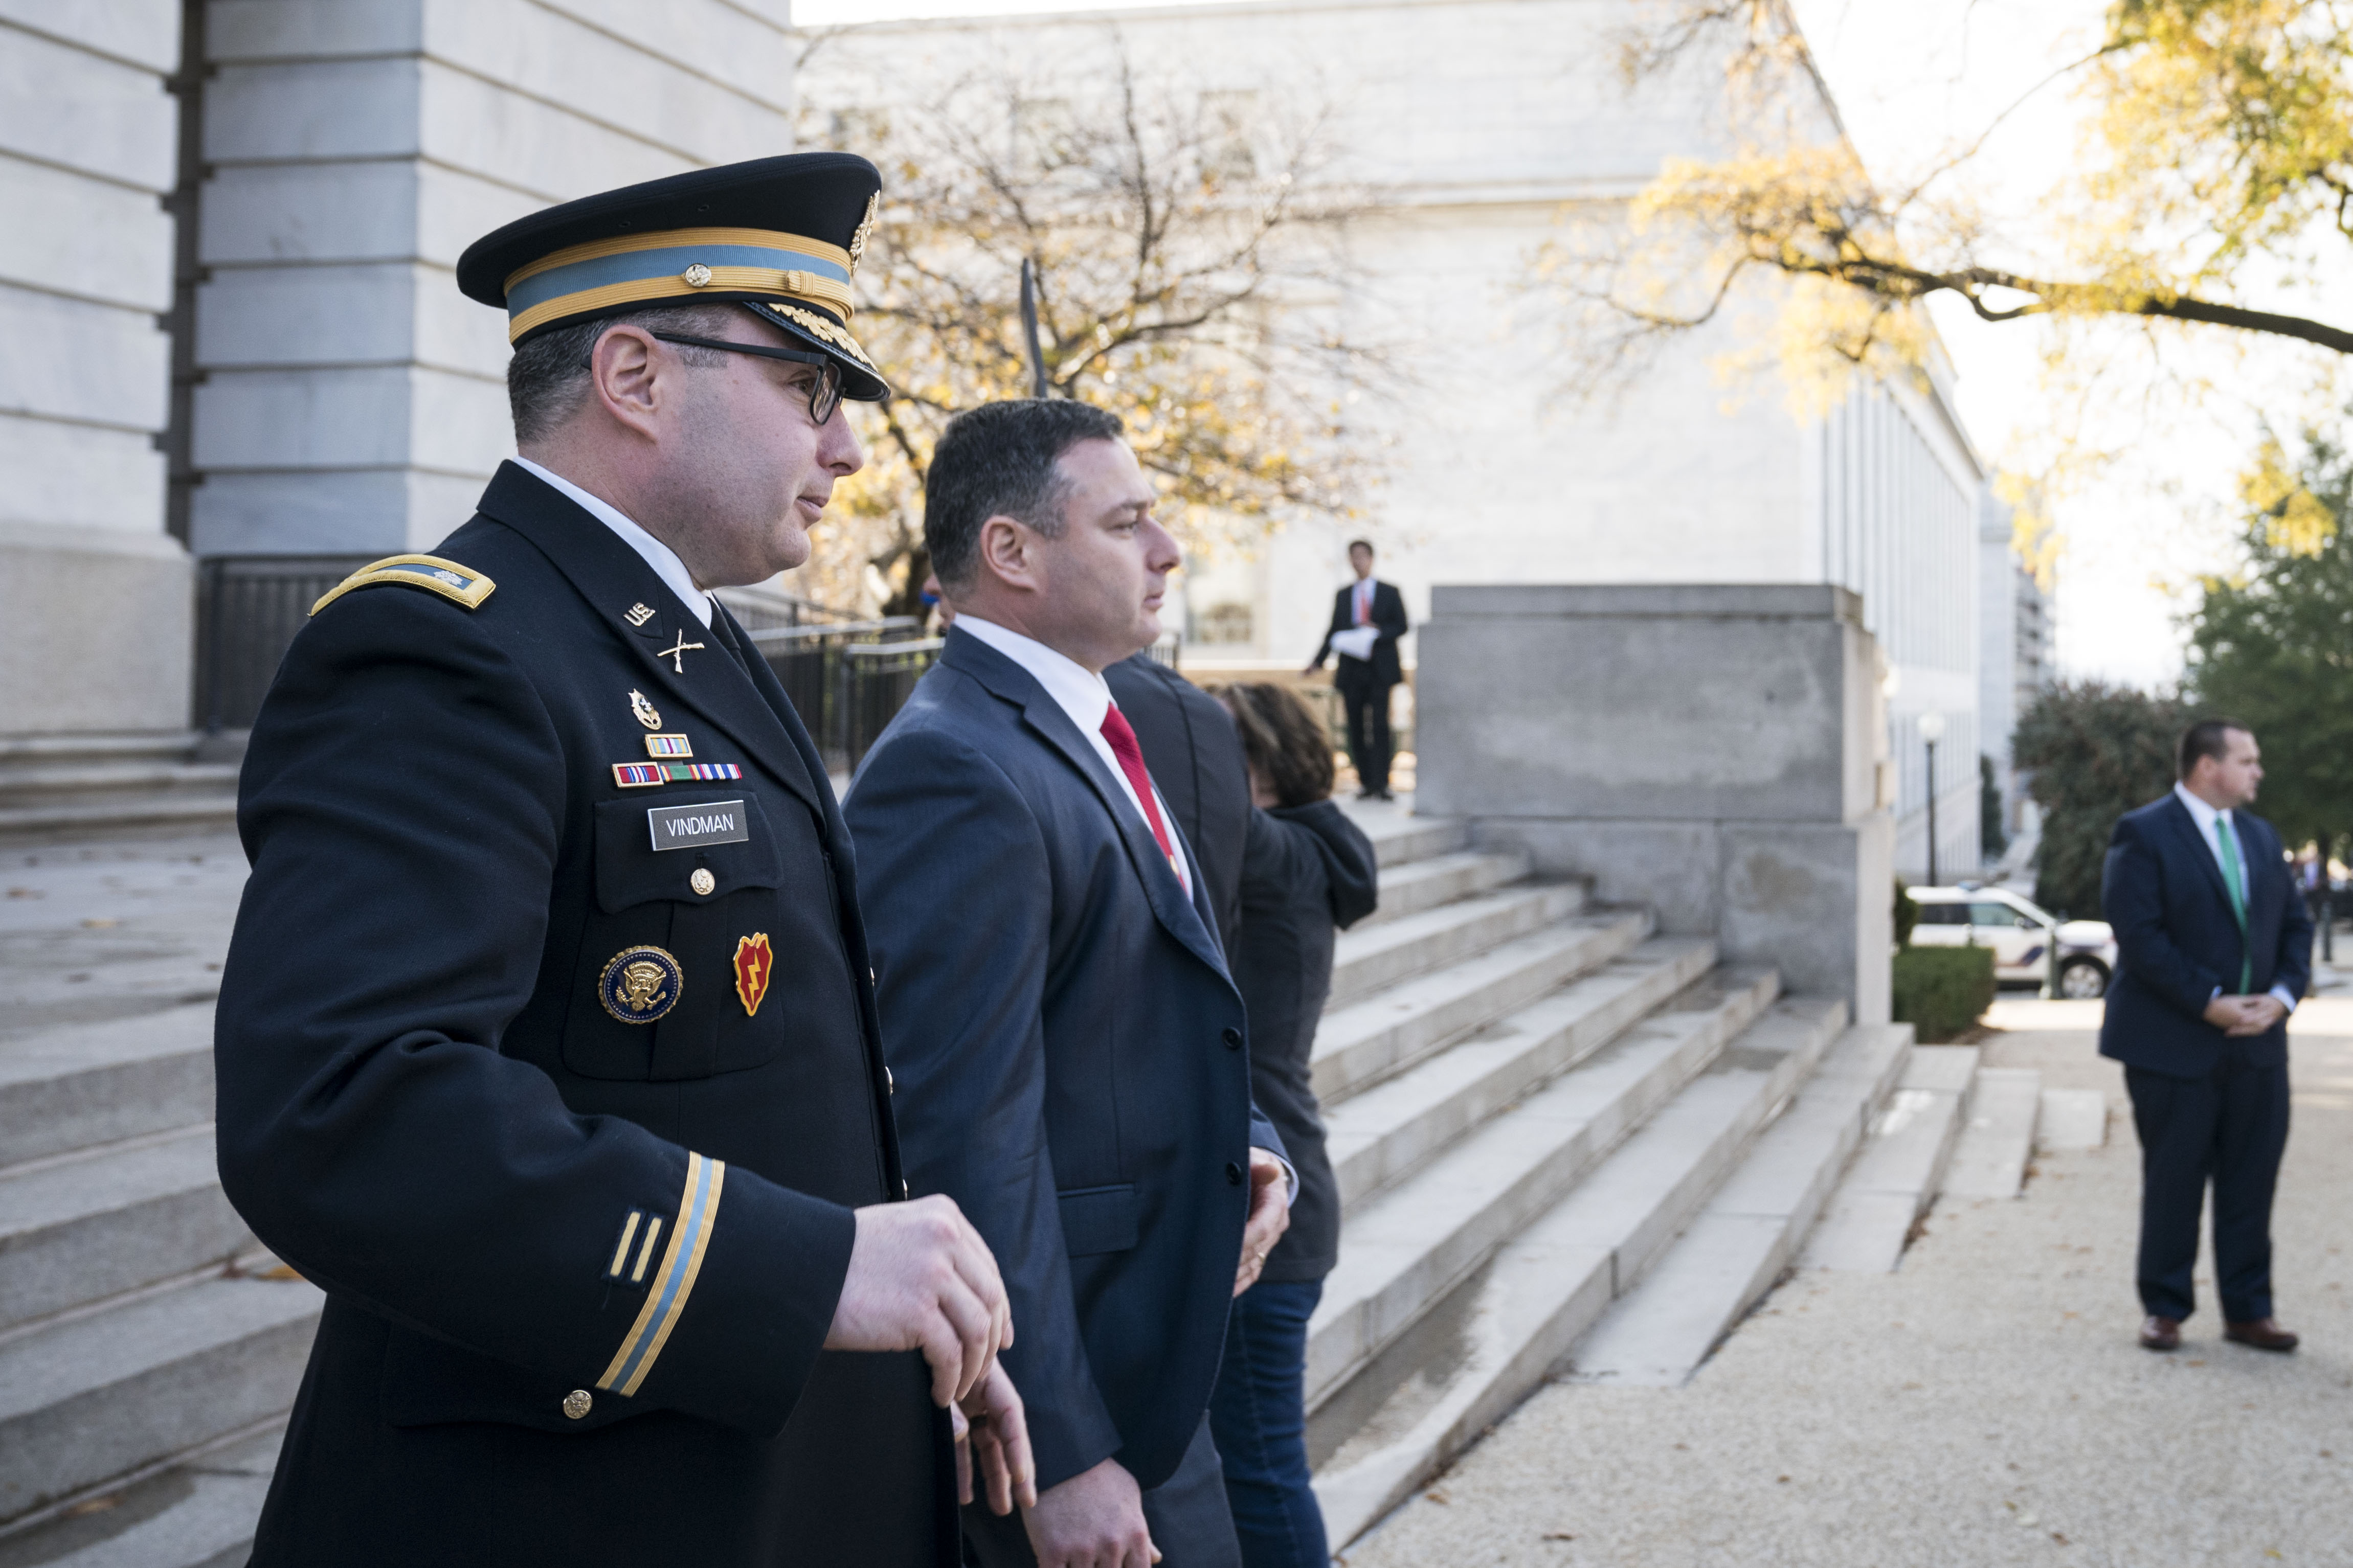 Lt. Col. Alexander Vindman, National Security Council Director for European Affairs, and his brother Leonid Vindman exit Longworth House Office Building after testifying before the House Intelligence Committee during the second week of impeachment hearings of President Donald Trump on November 19, 2019. (Sarah Silbiger/Getty Images)